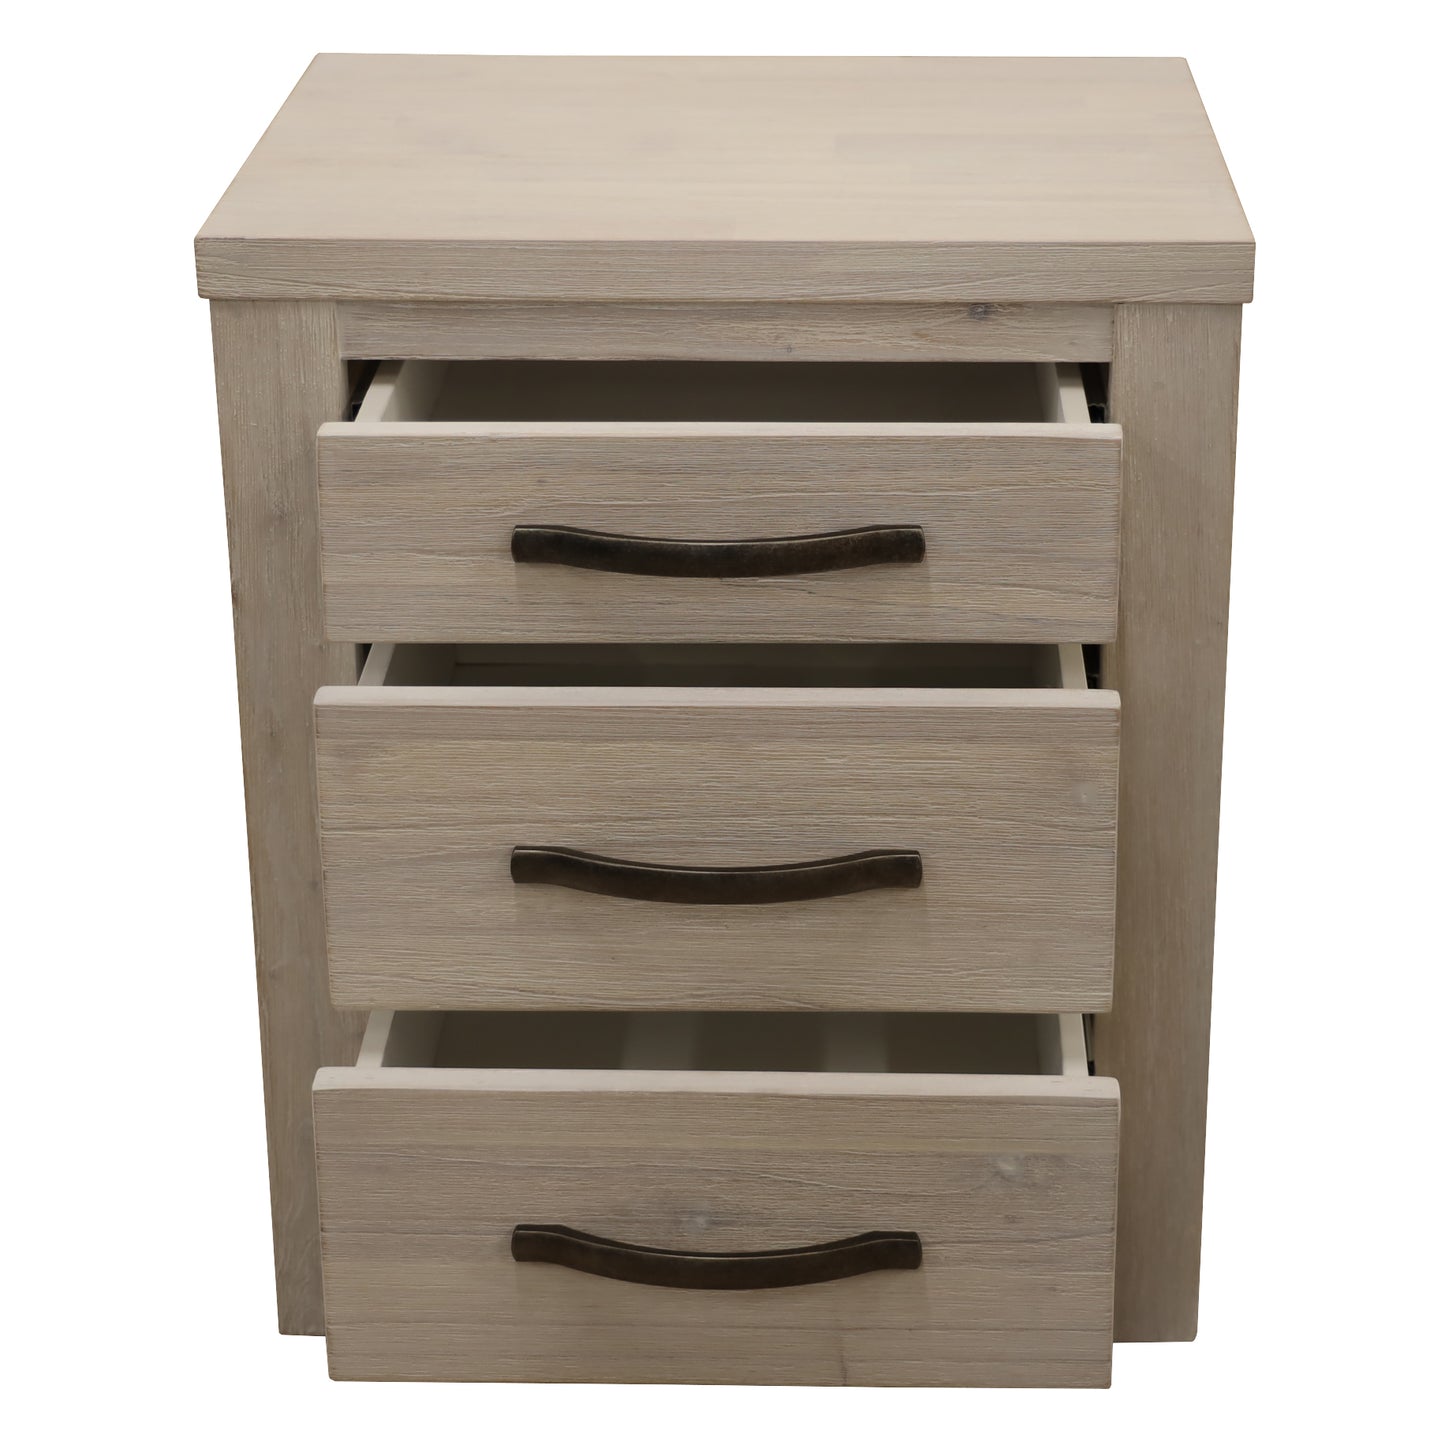 Foxglove Bedside Tables 3 Drawers - White Ash